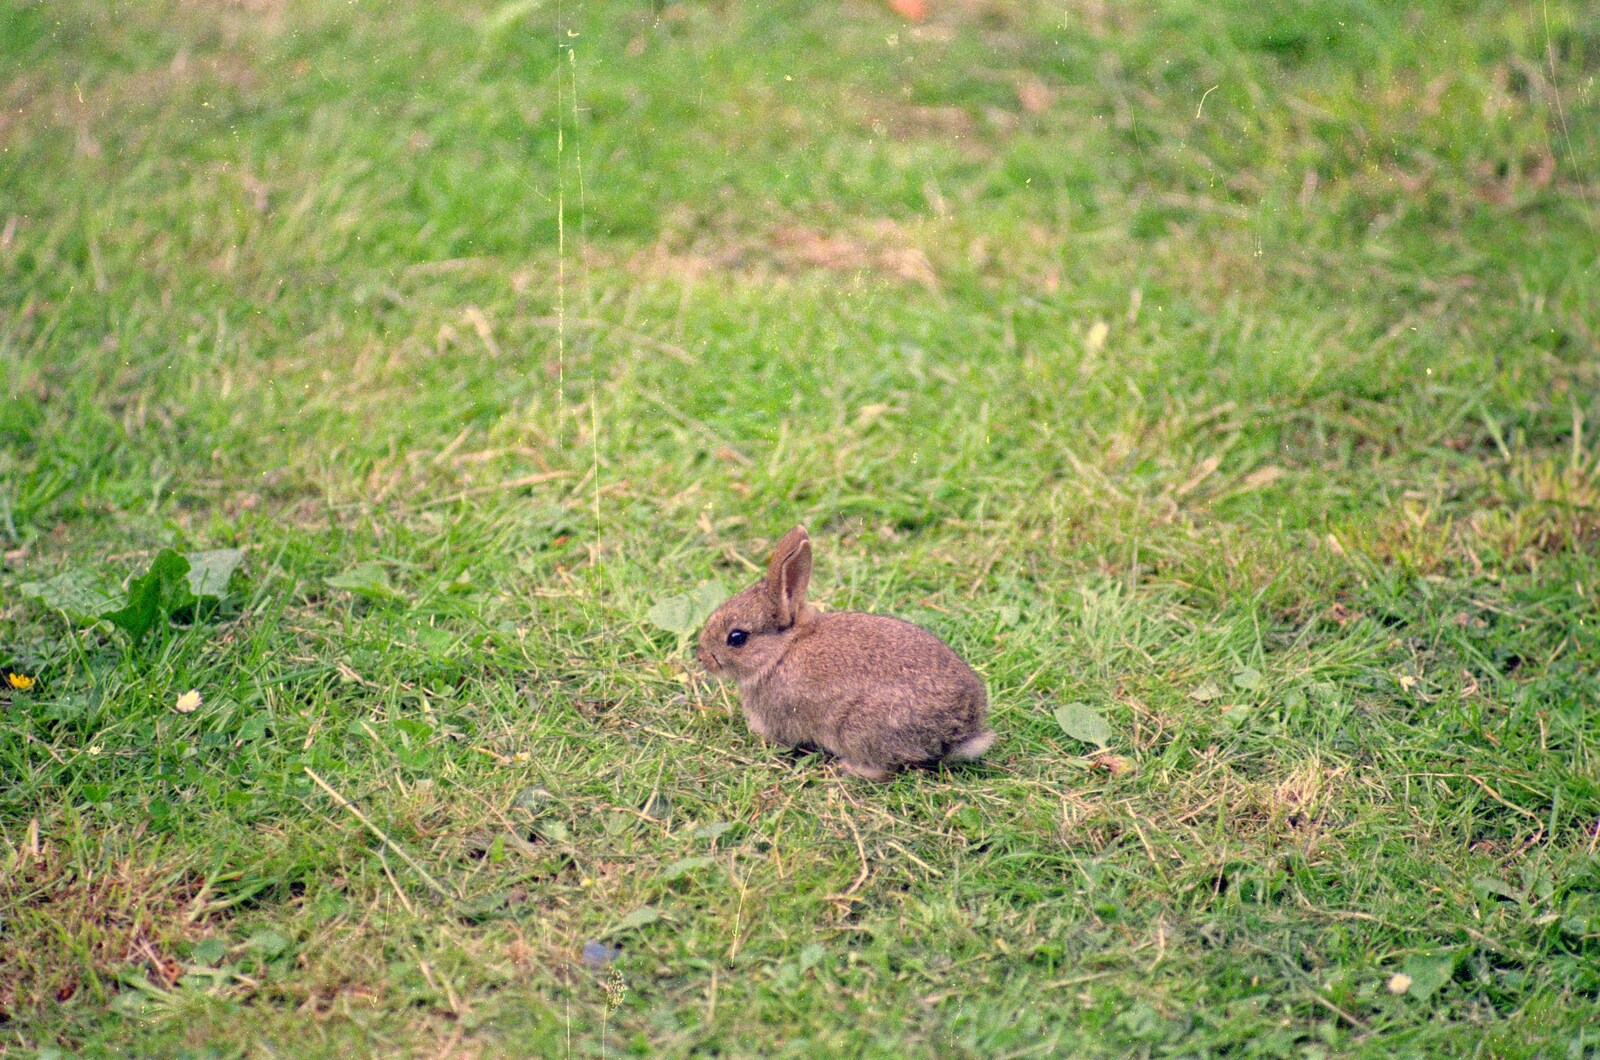 Sewell's Cottage Garden Telly, Red House, Norfolk - 14th May 1988: A baby rabbit has started hanging around in the garden